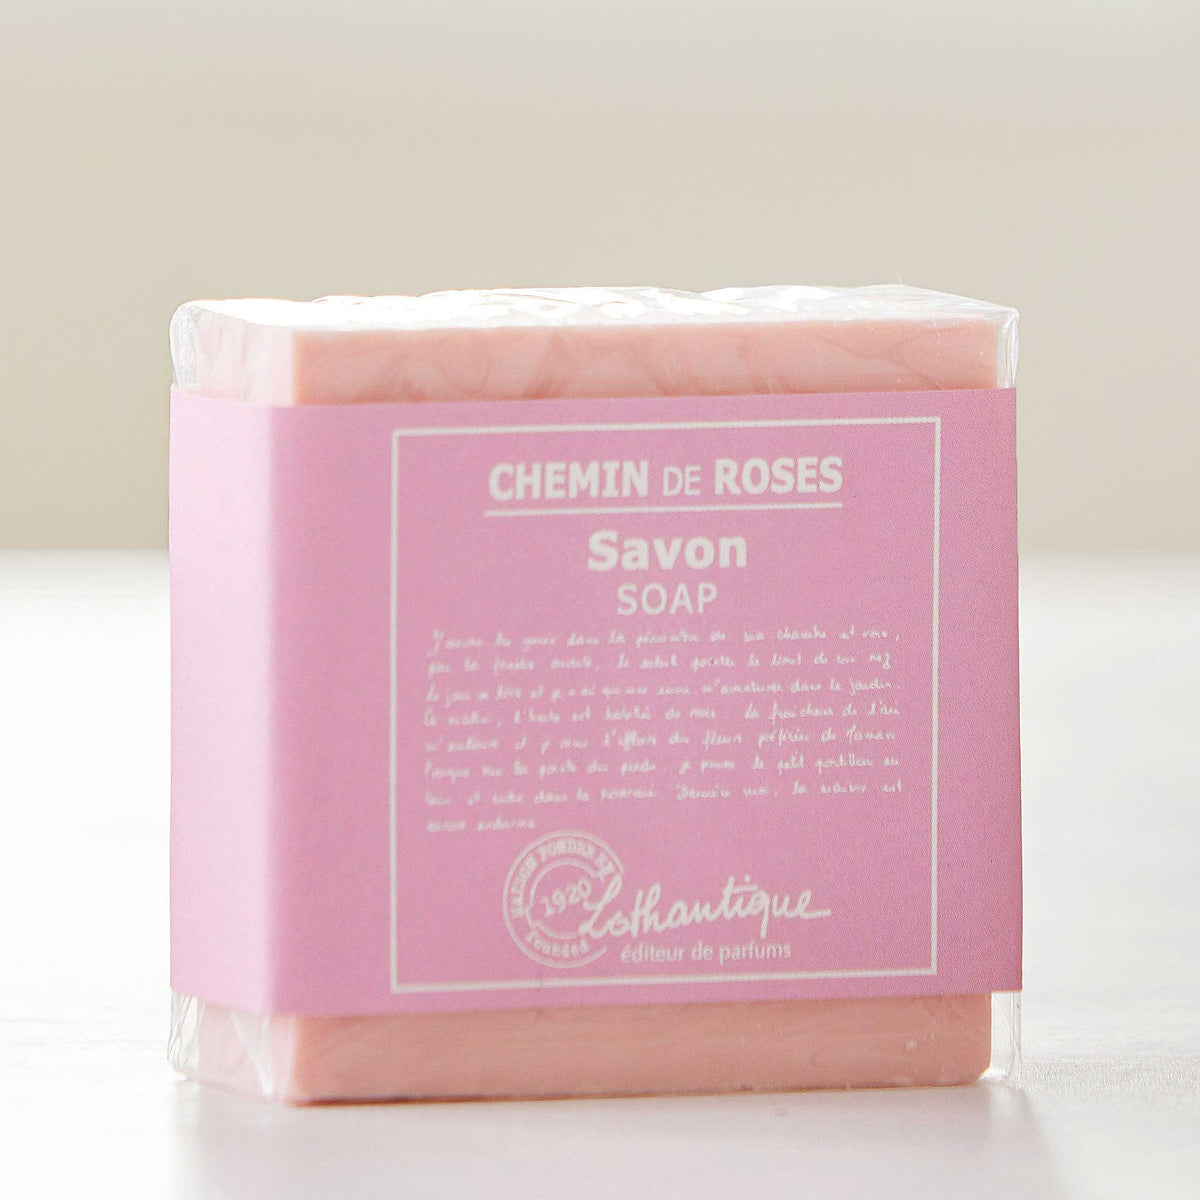 CHEMIN de ROSES BATH, BODY AND HOME COLLECTION